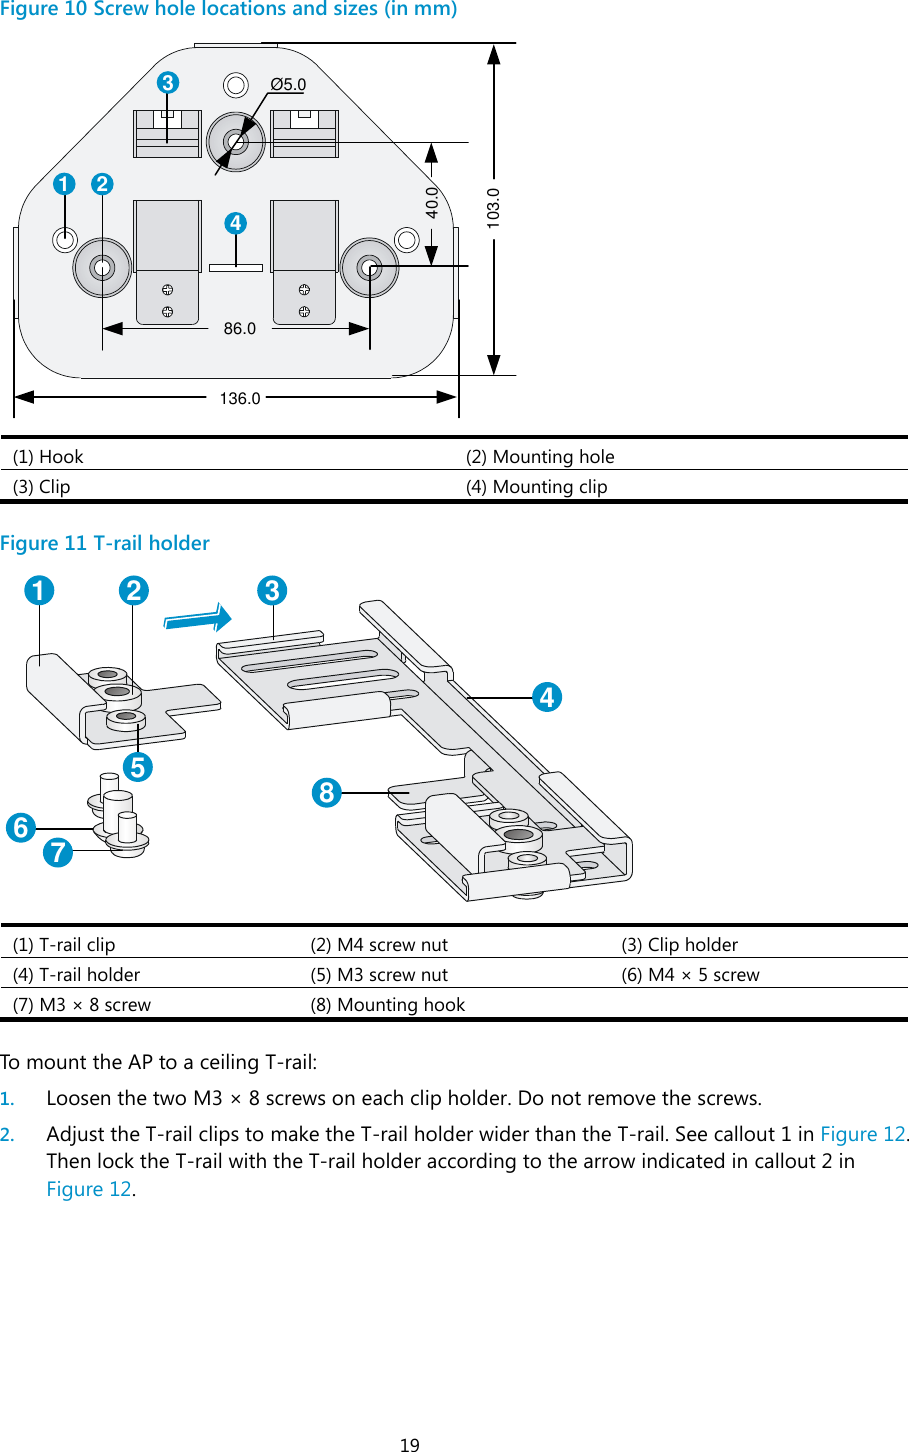  19 Figure 10 Screw hole locations and sizes (in mm)  (1) Hook (2) Mounting hole (3) Clip (4) Mounting clip  Figure 11 T-rail holder  (1) T-rail clip (2) M4 screw nut (3) Clip holder (4) T-rail holder (5) M3 screw nut (6) M4 ×  5 screw (7) M3 ×  8 screw (8) Mounting hook   To mount the AP to a ceiling T-rail: 1. Loosen the two M3 ×  8 screws on each clip holder. Do not remove the screws. 2. Adjust the T-rail clips to make the T-rail holder wider than the T-rail. See callout 1 in Figure 12. Then lock the T-rail with the T-rail holder according to the arrow indicated in callout 2 in Figure 12. 1 234Ø 5.040.0103.086.0136.01 2 345678